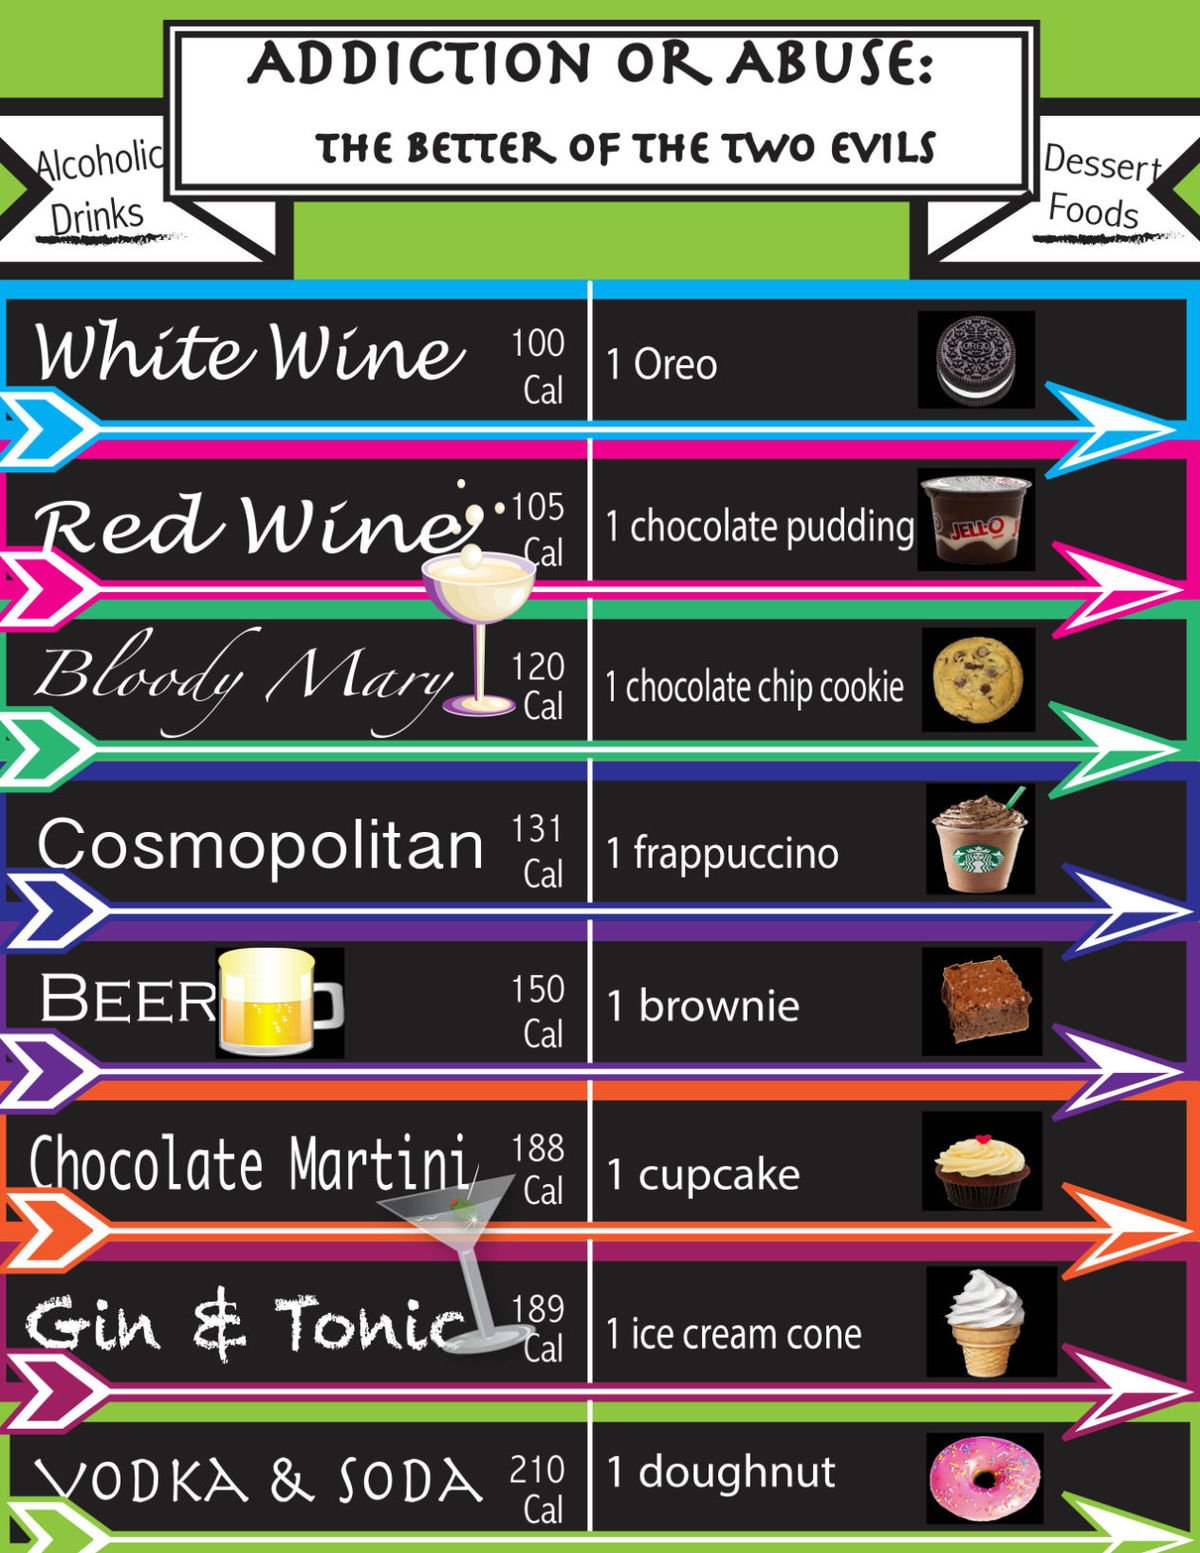 What alcohol has the least calories?